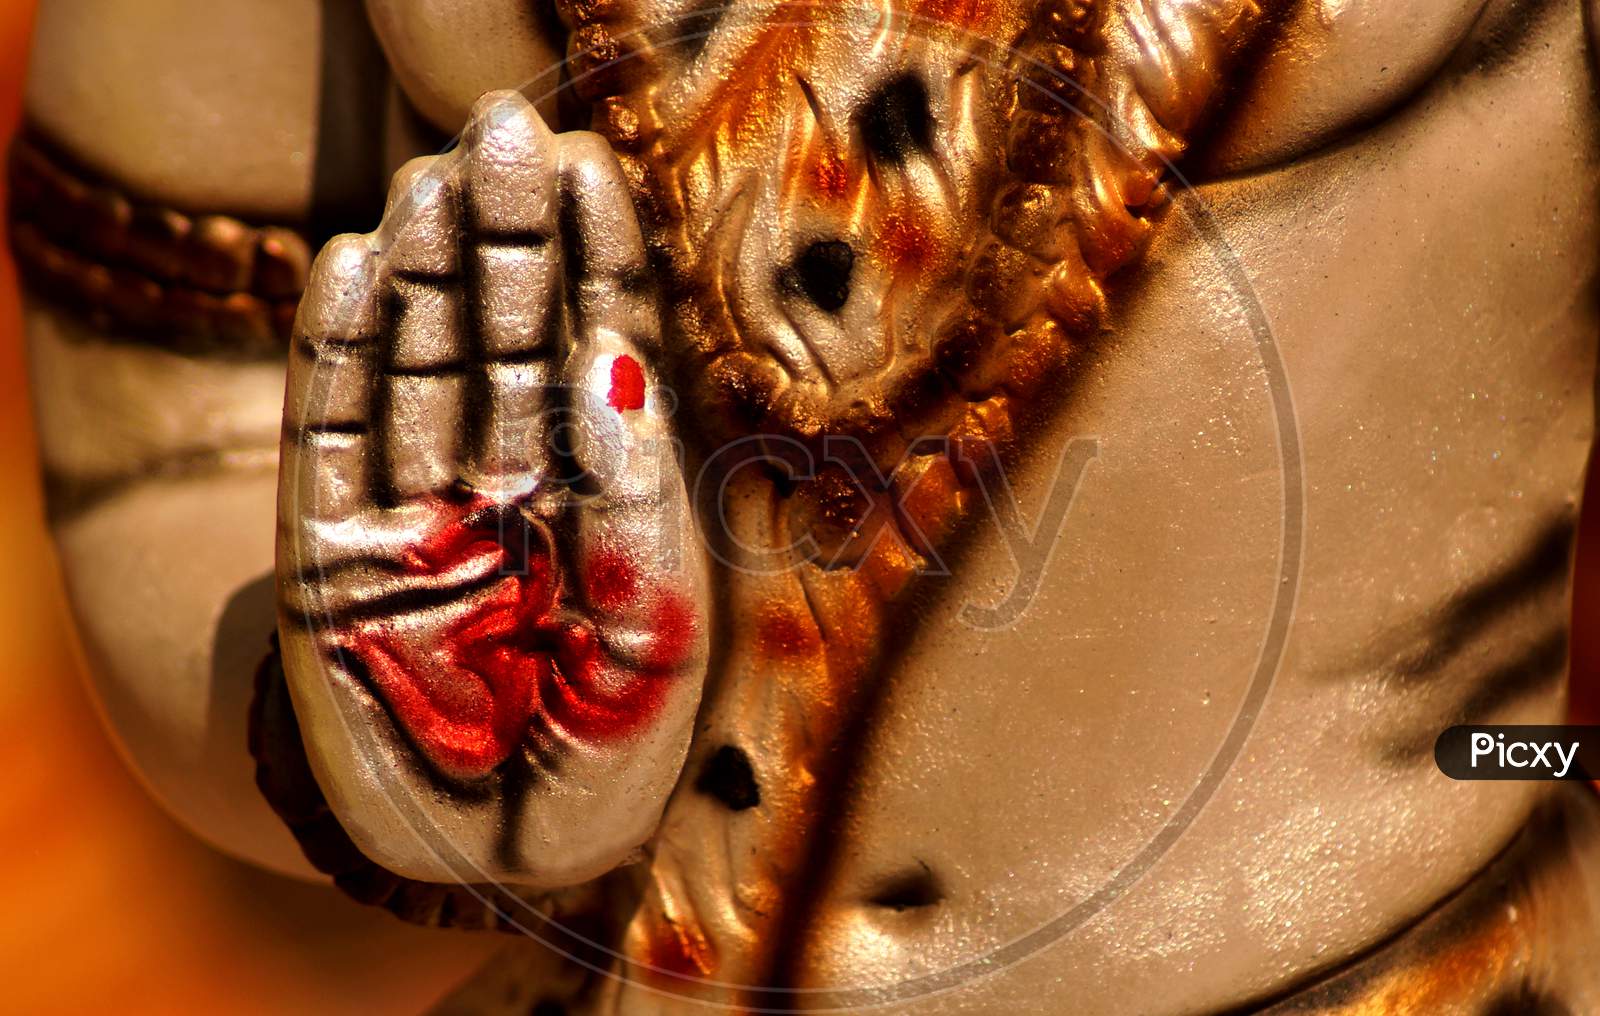 View Of Hand Of Indian God Shiva Idol ,In Blessing Pose